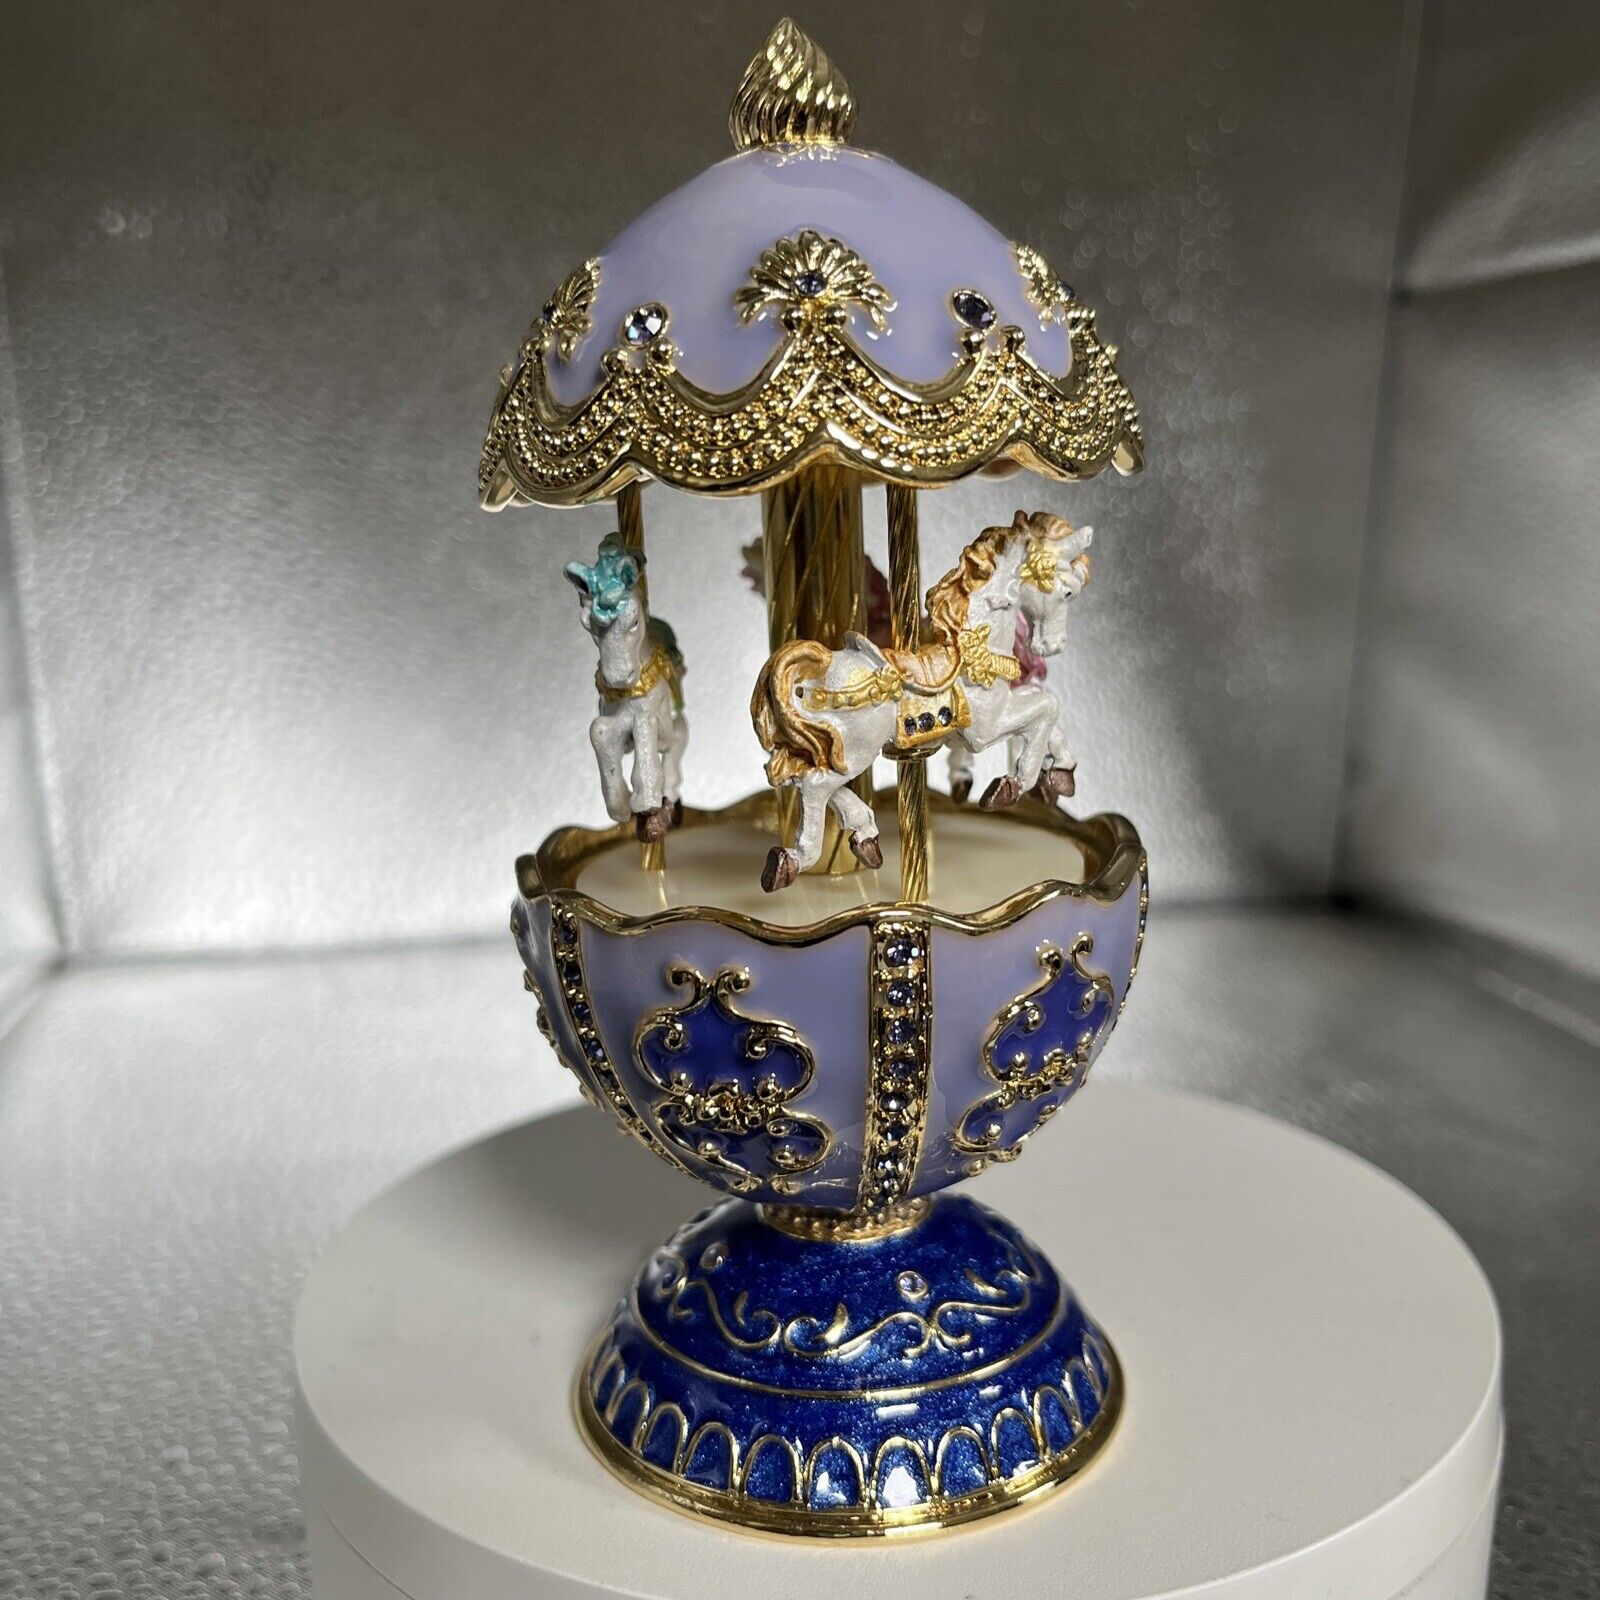 PURPLE BLUE MUSICAL CAROUSEL FABERGE EGG WITH HORSES BY KEREN KOPAL, DETAILS